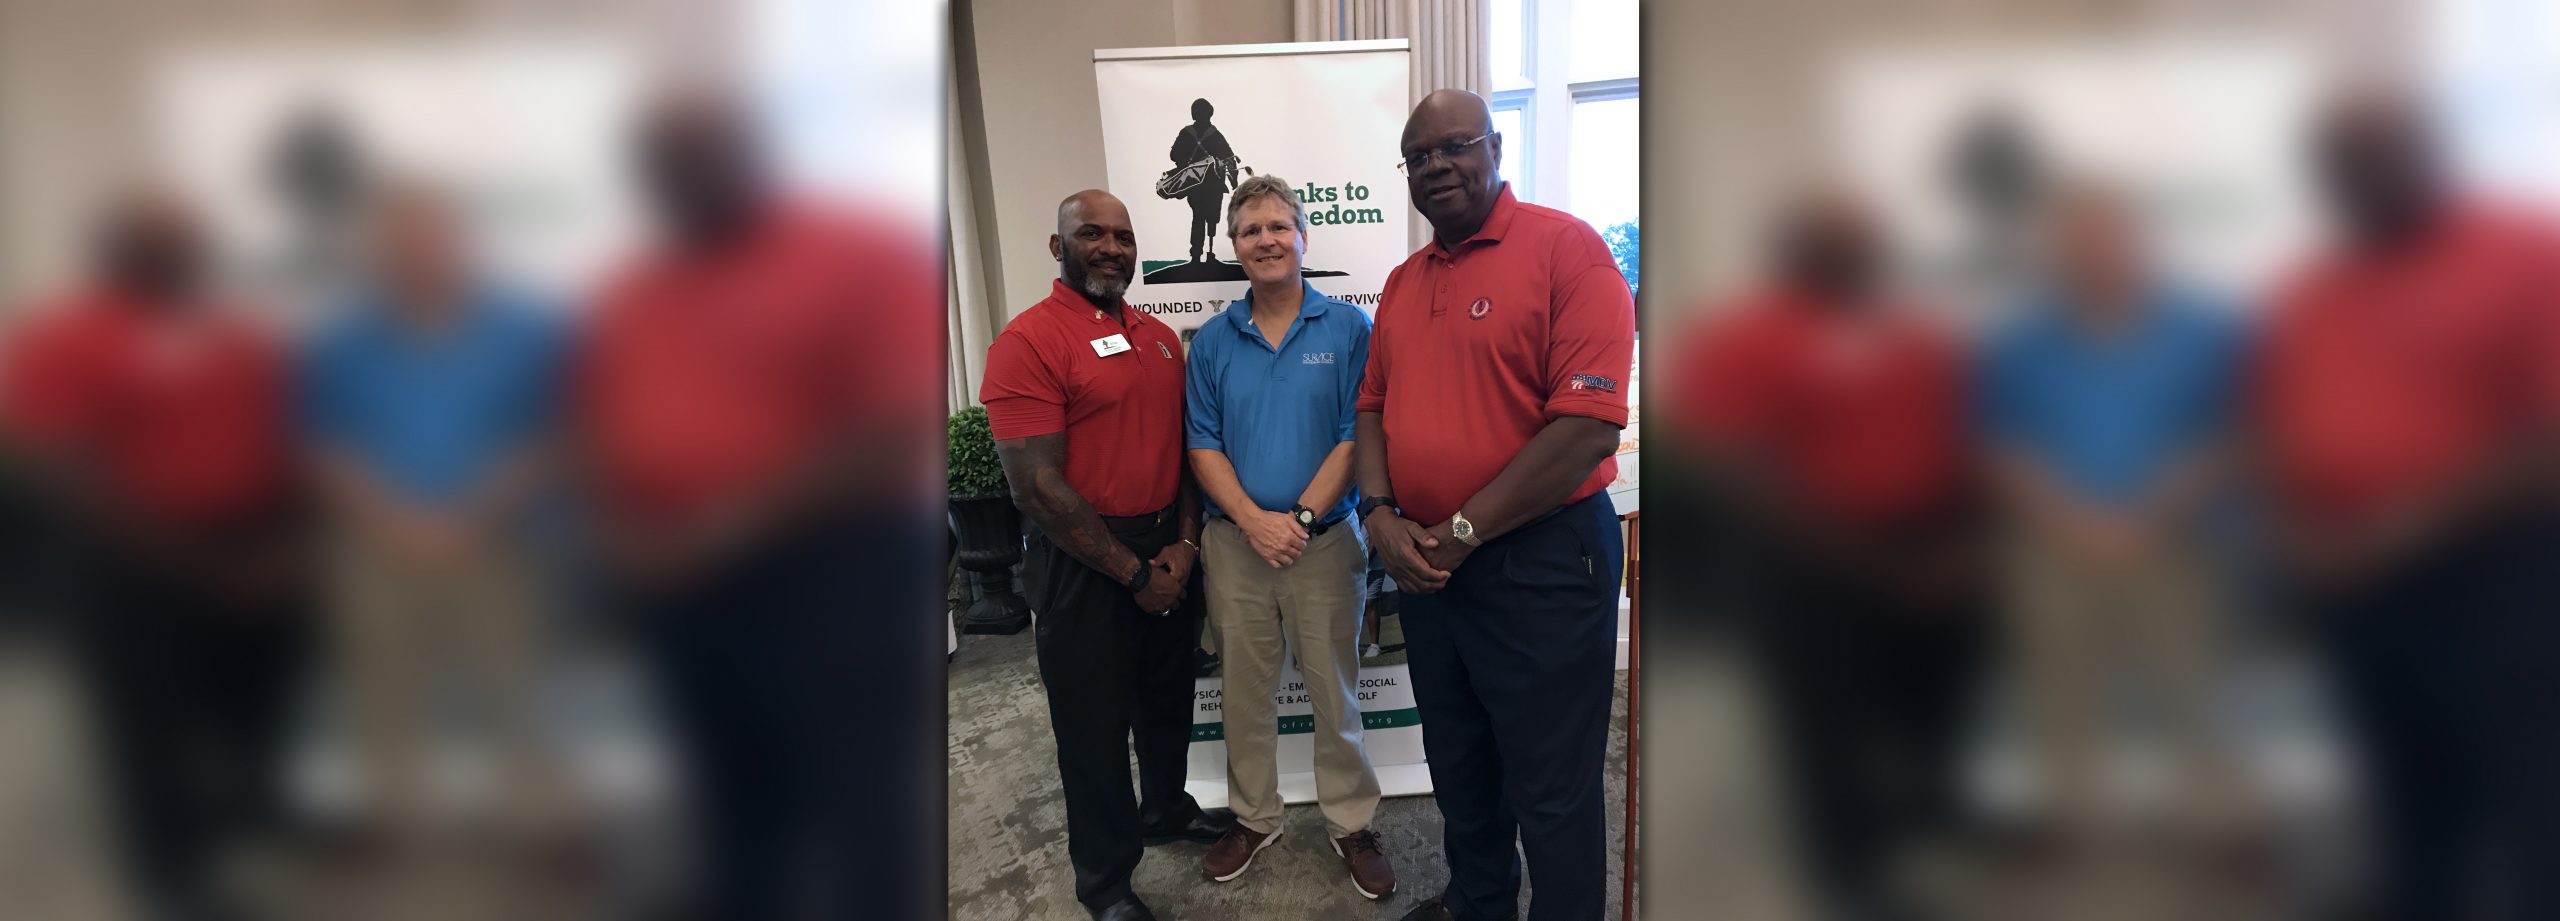 1SG (R) T.A. Henry, Links to Freedom Board Member (left); Jeff Foulk, SURVICE CEO (middle); MG (R) Peet Proctor, DLA Foundation Board Member (right)